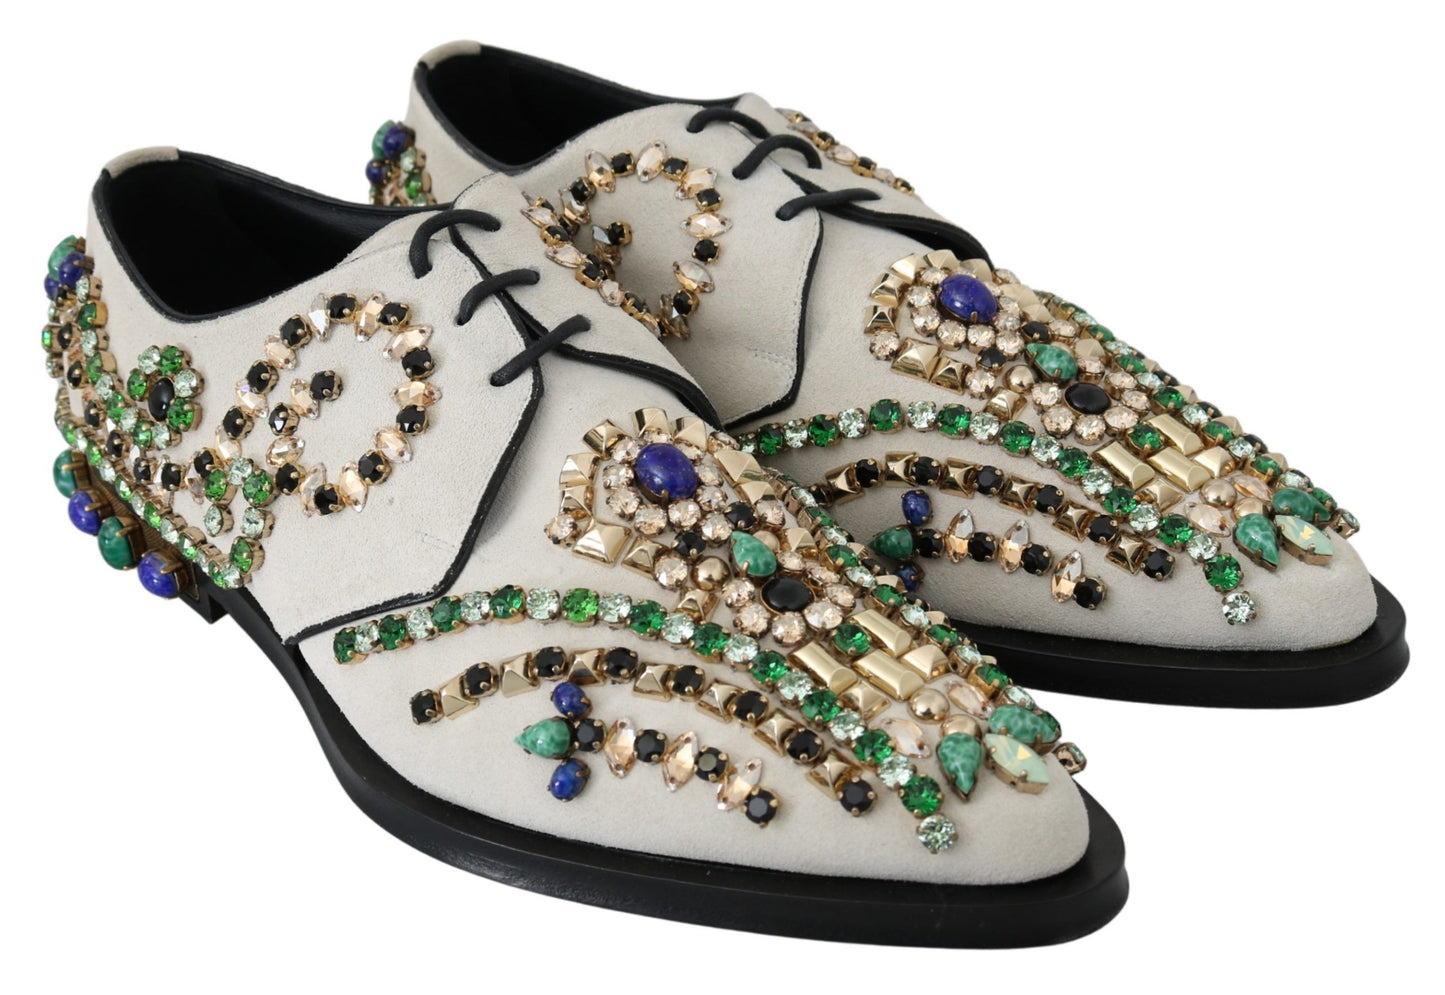 Elegant White Suede Dress Flats with Crystals